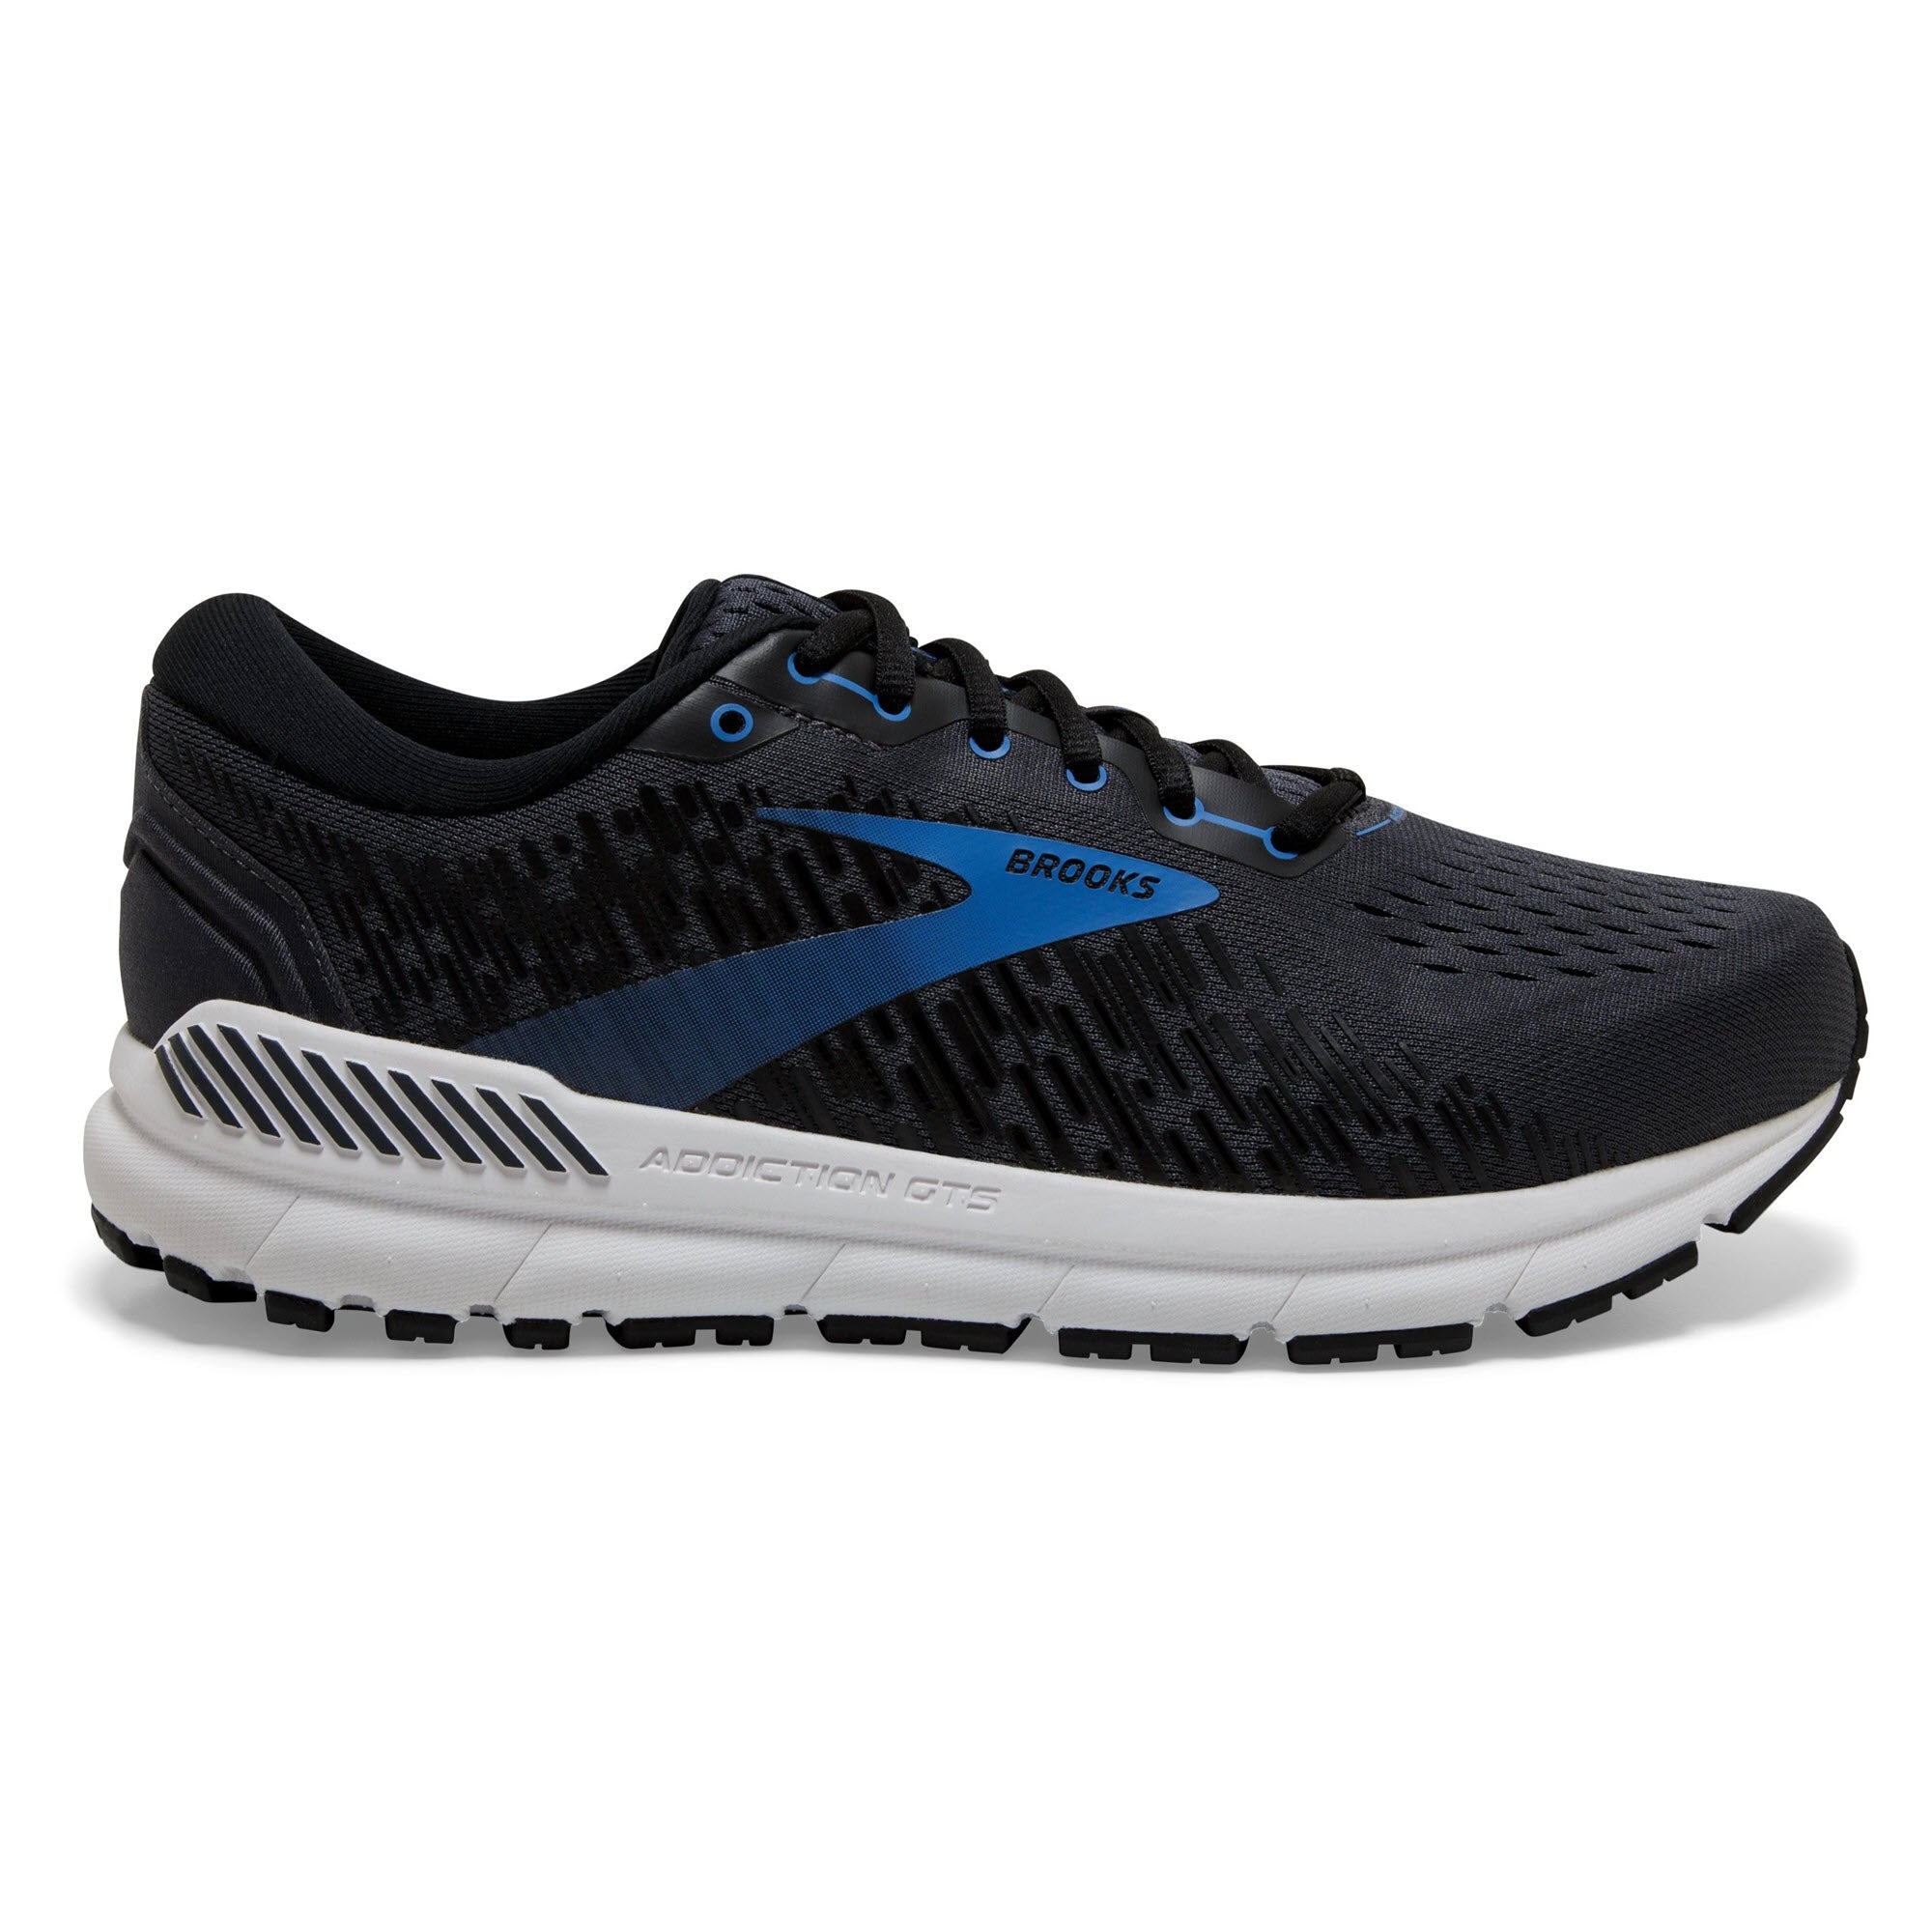 A black and blue Brooks Addiction GTS 15 running shoe with GuideRail technology and a white sole, designed for overpronators.